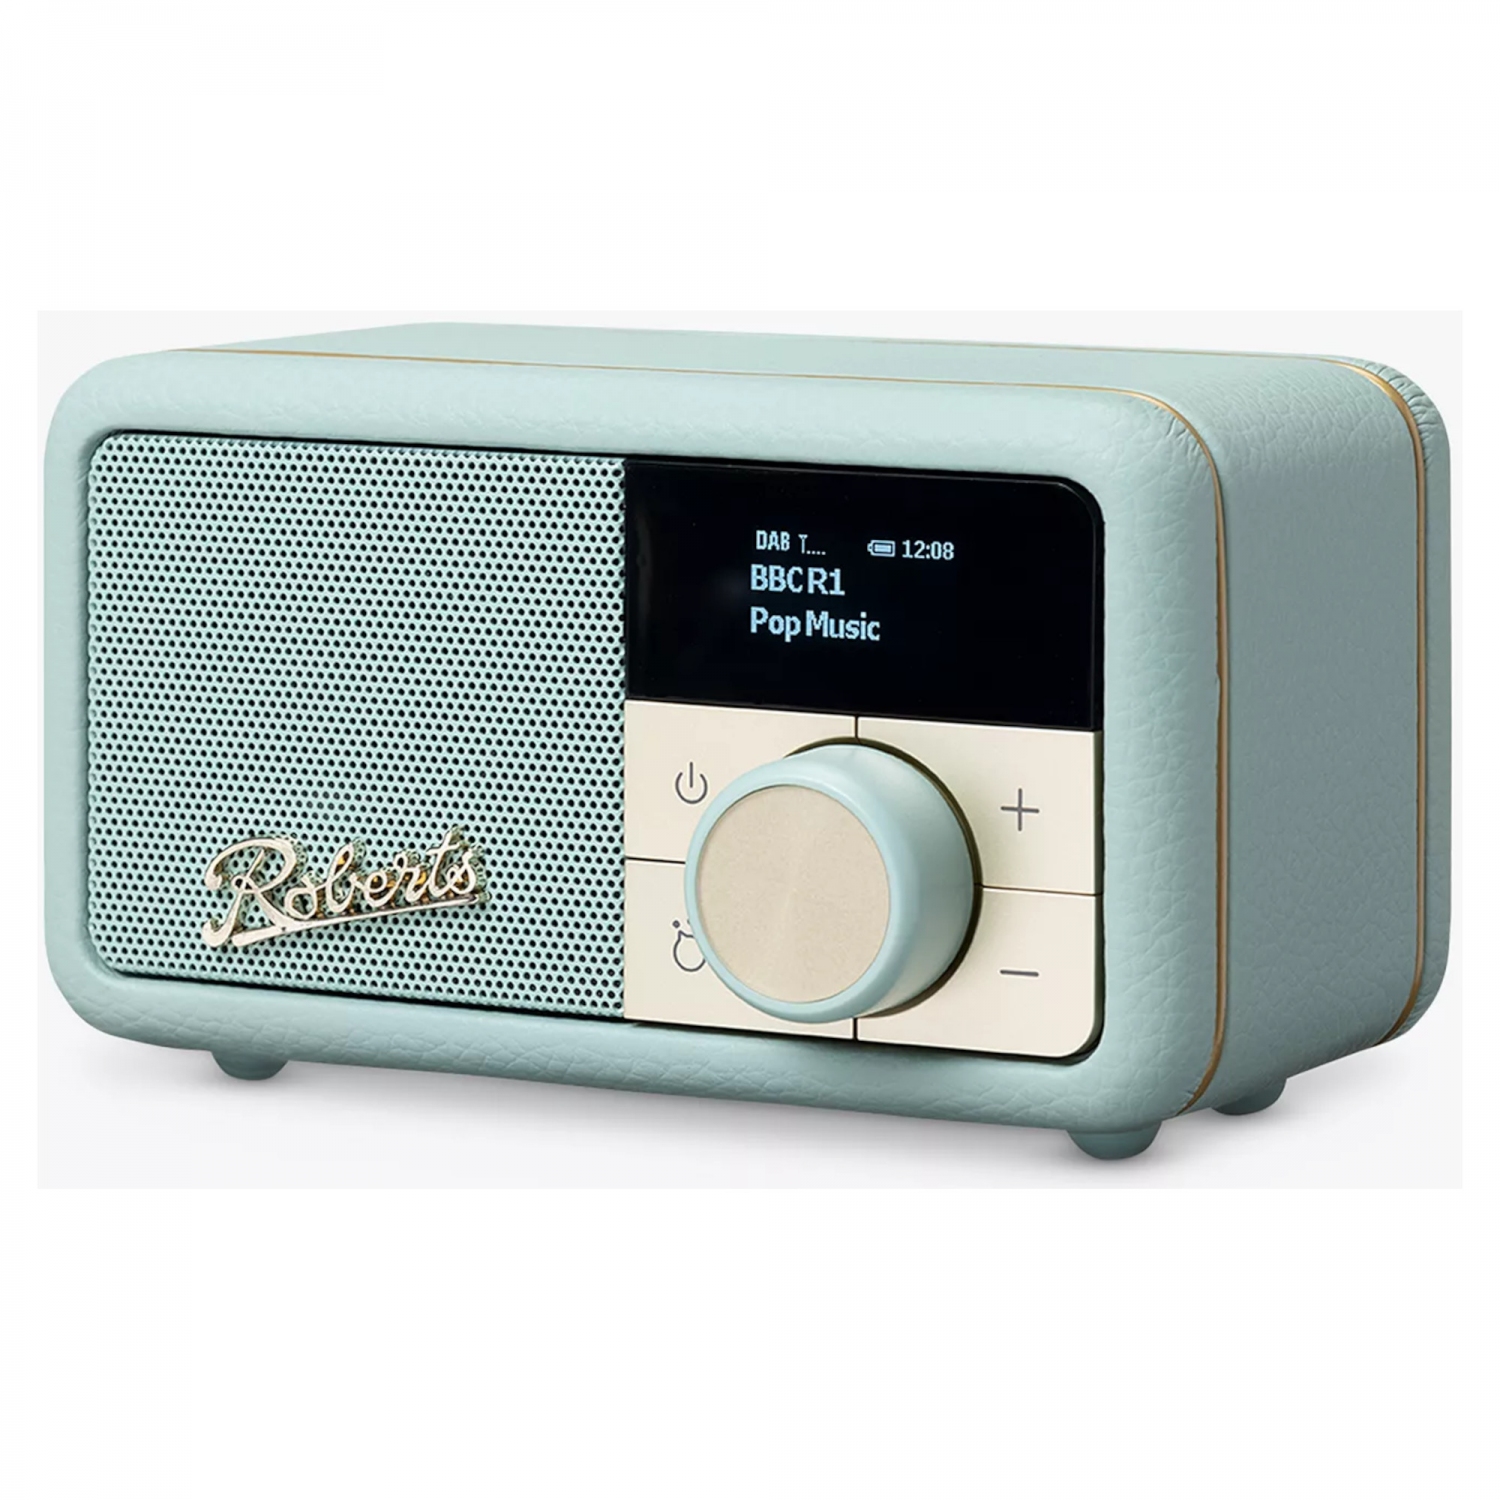 Roberts Revival'DAB / DAB+ / FM RDS digital radio, rechargable batteries  USB Charge in Duck Egg - Bek's Electrical